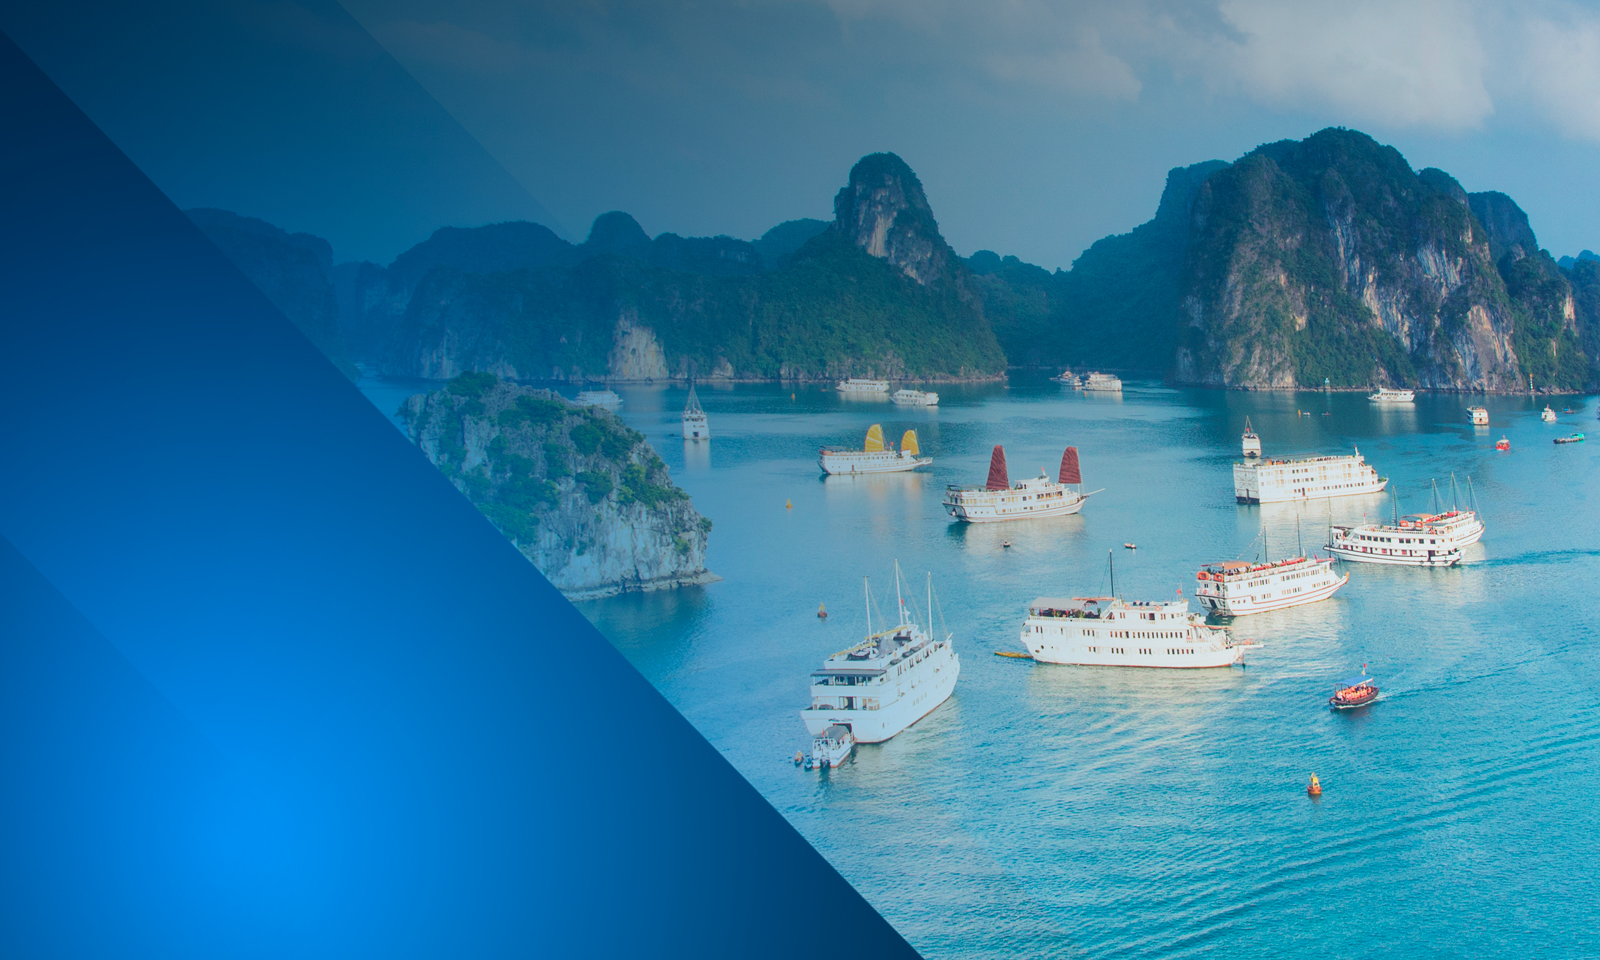 Image of Vietnam with boat on the water Fiera Capital celebrates third anniversary of OAKS EM Select Strategy